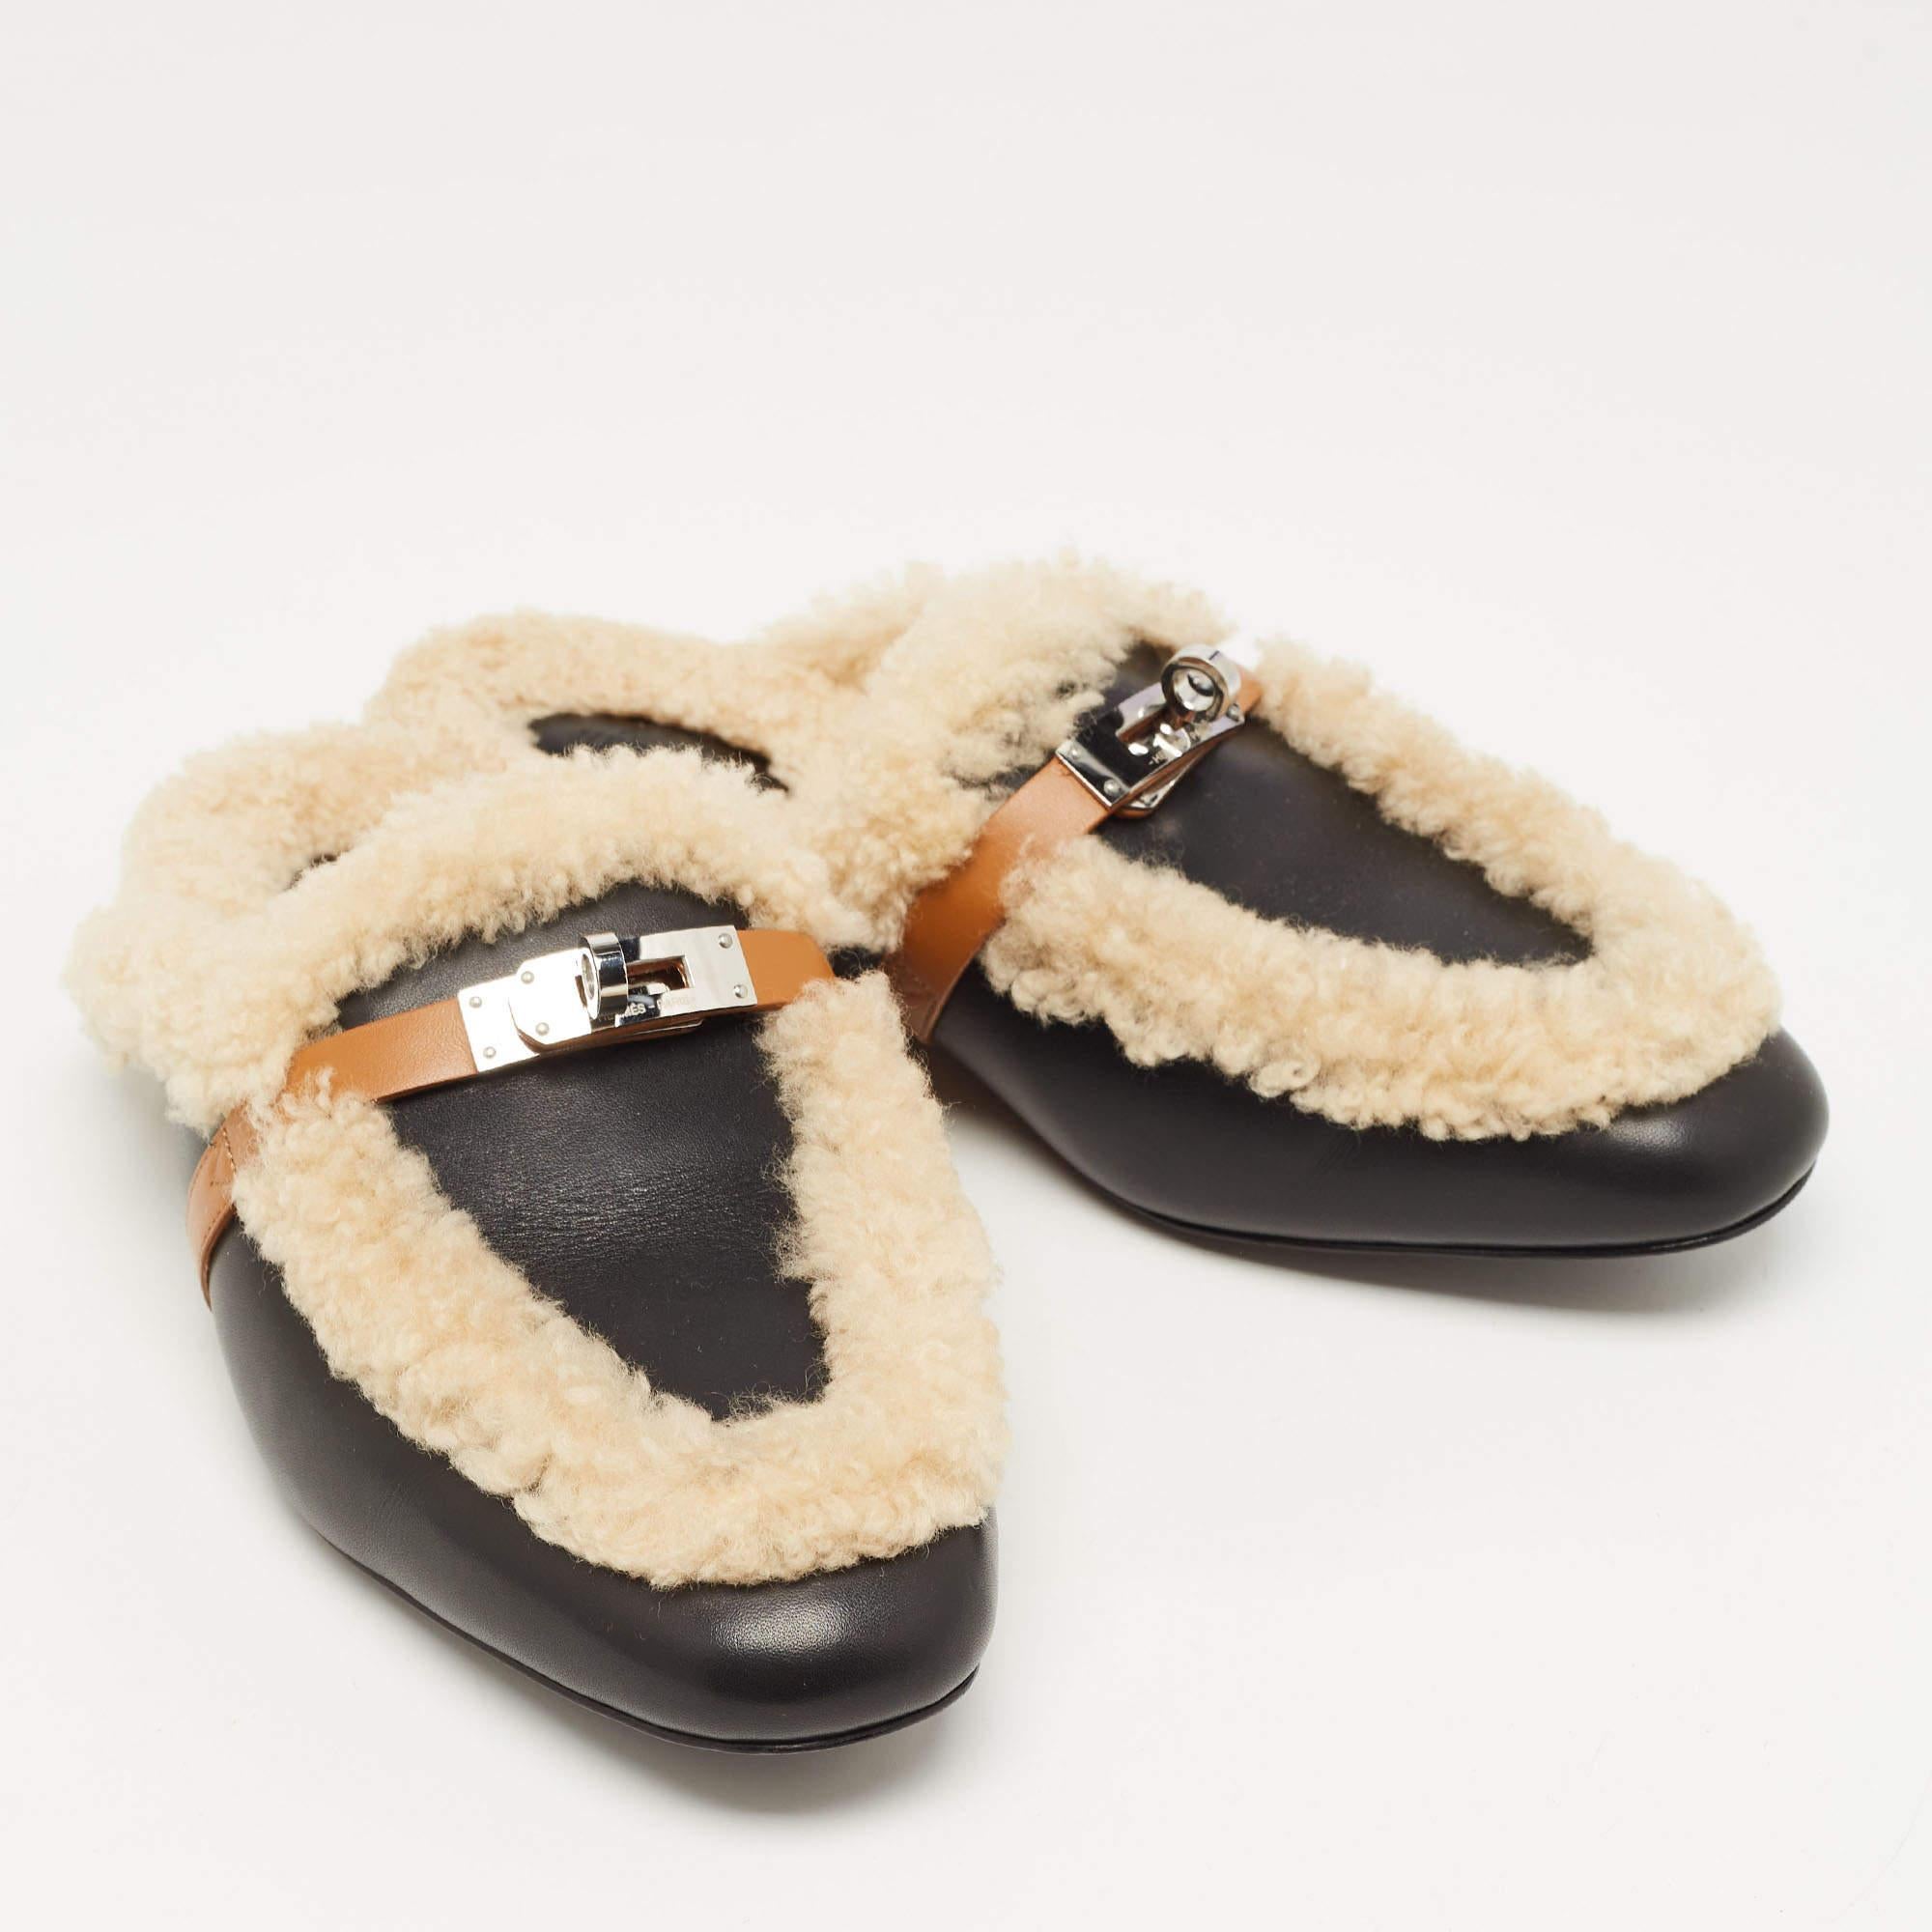 Women's Hermes Black/Beige Leather and Shearling Fur Oz Flat Mules Size 40